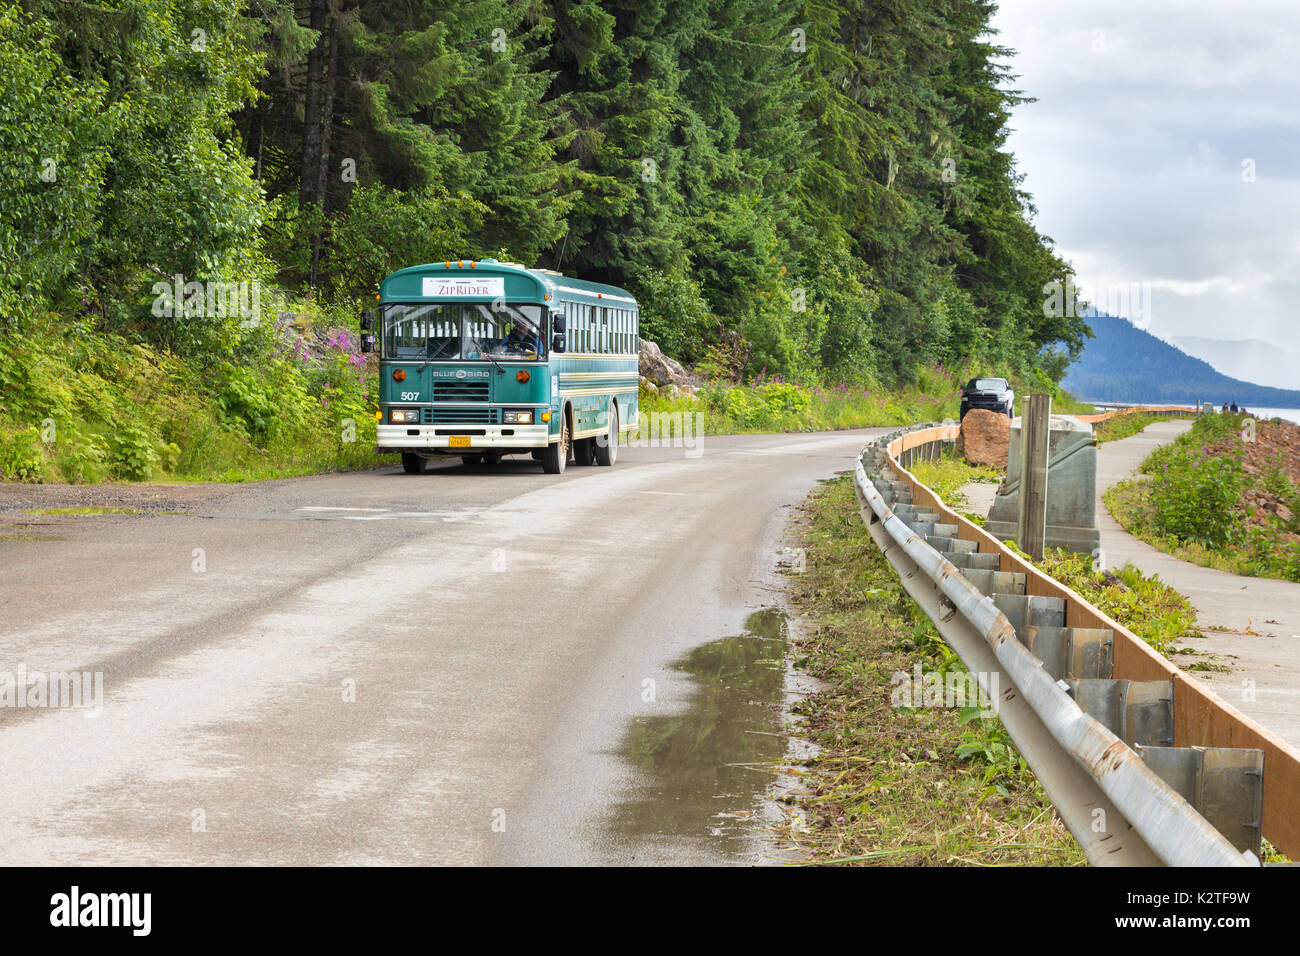 Icy Strait Point, Hoonah, Alaska, USA - July 31th, 2017: A local shuttle bus service to get the mountains where starts the Icy Strait Point ZipRider. Stock Photo